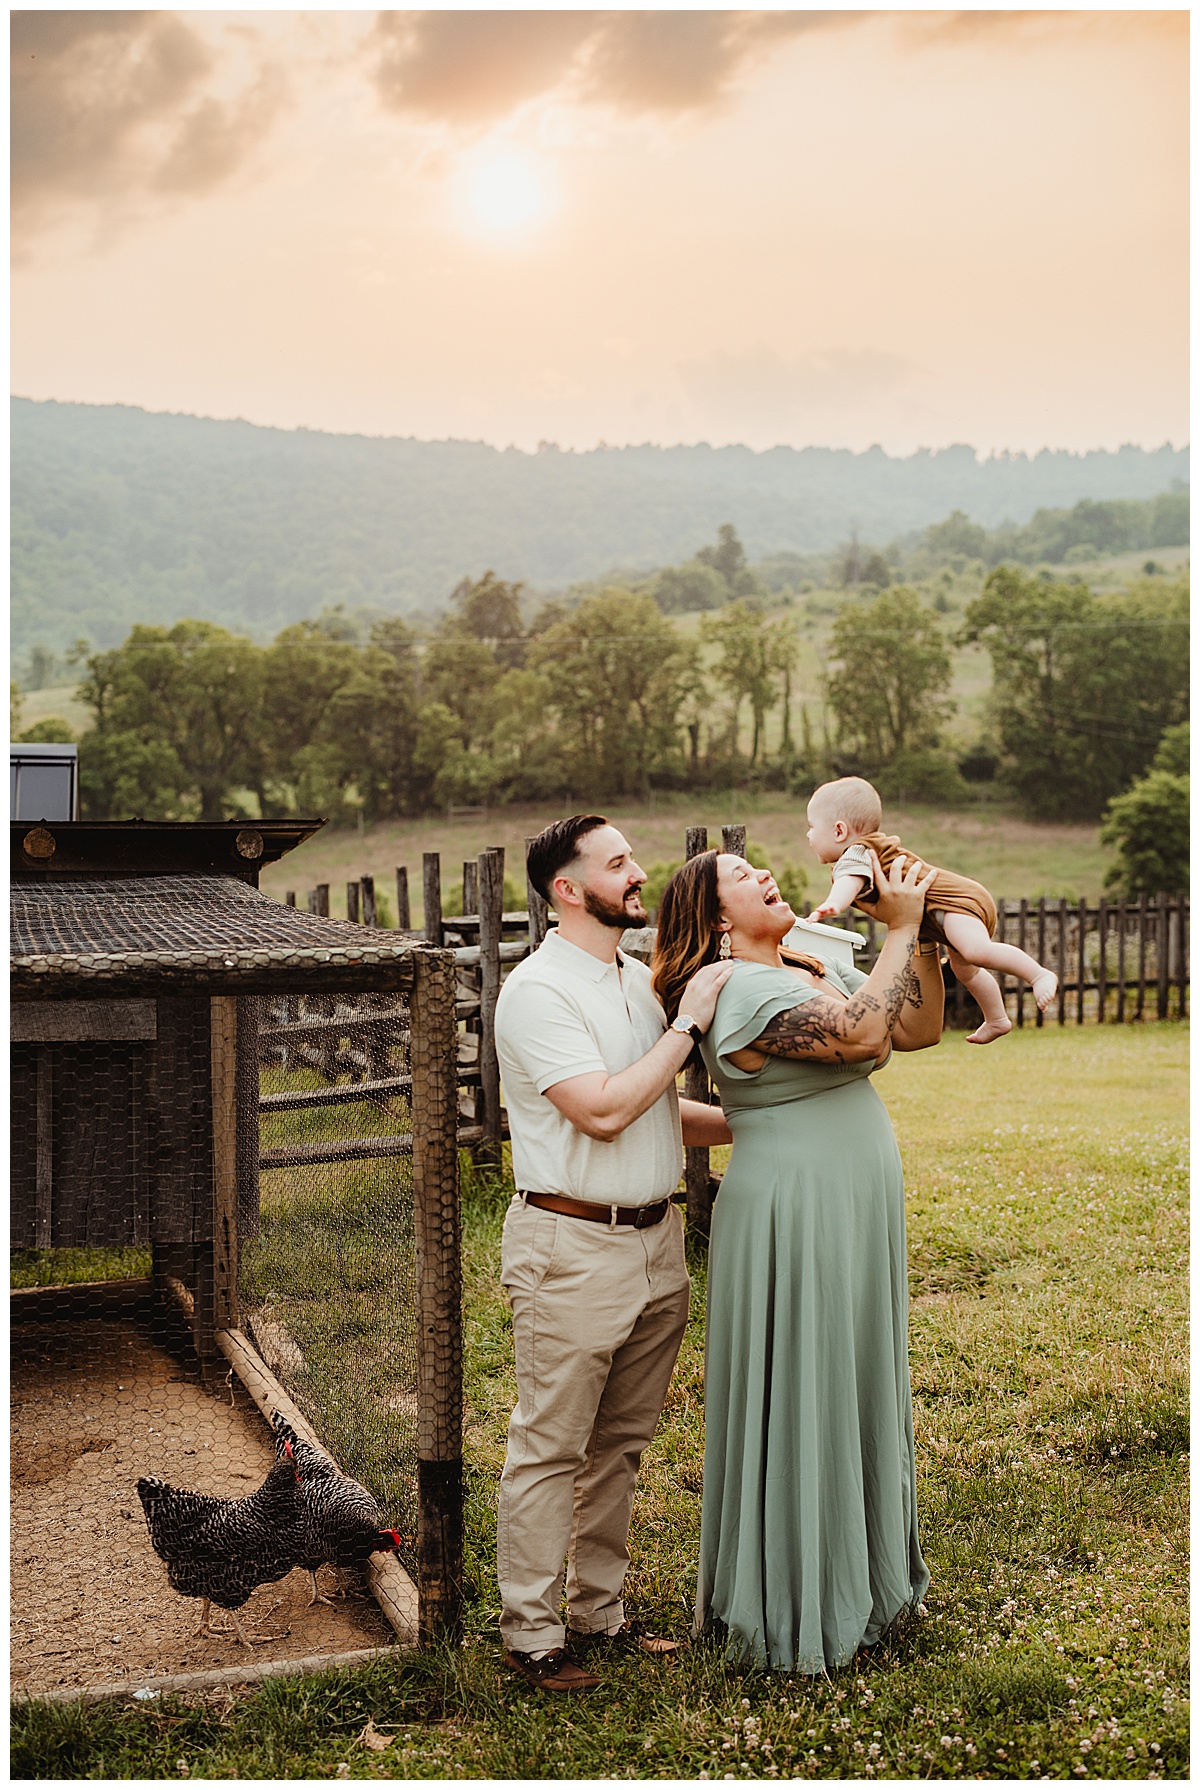 Parents mile big at baby boy for Virginia Family Photographer